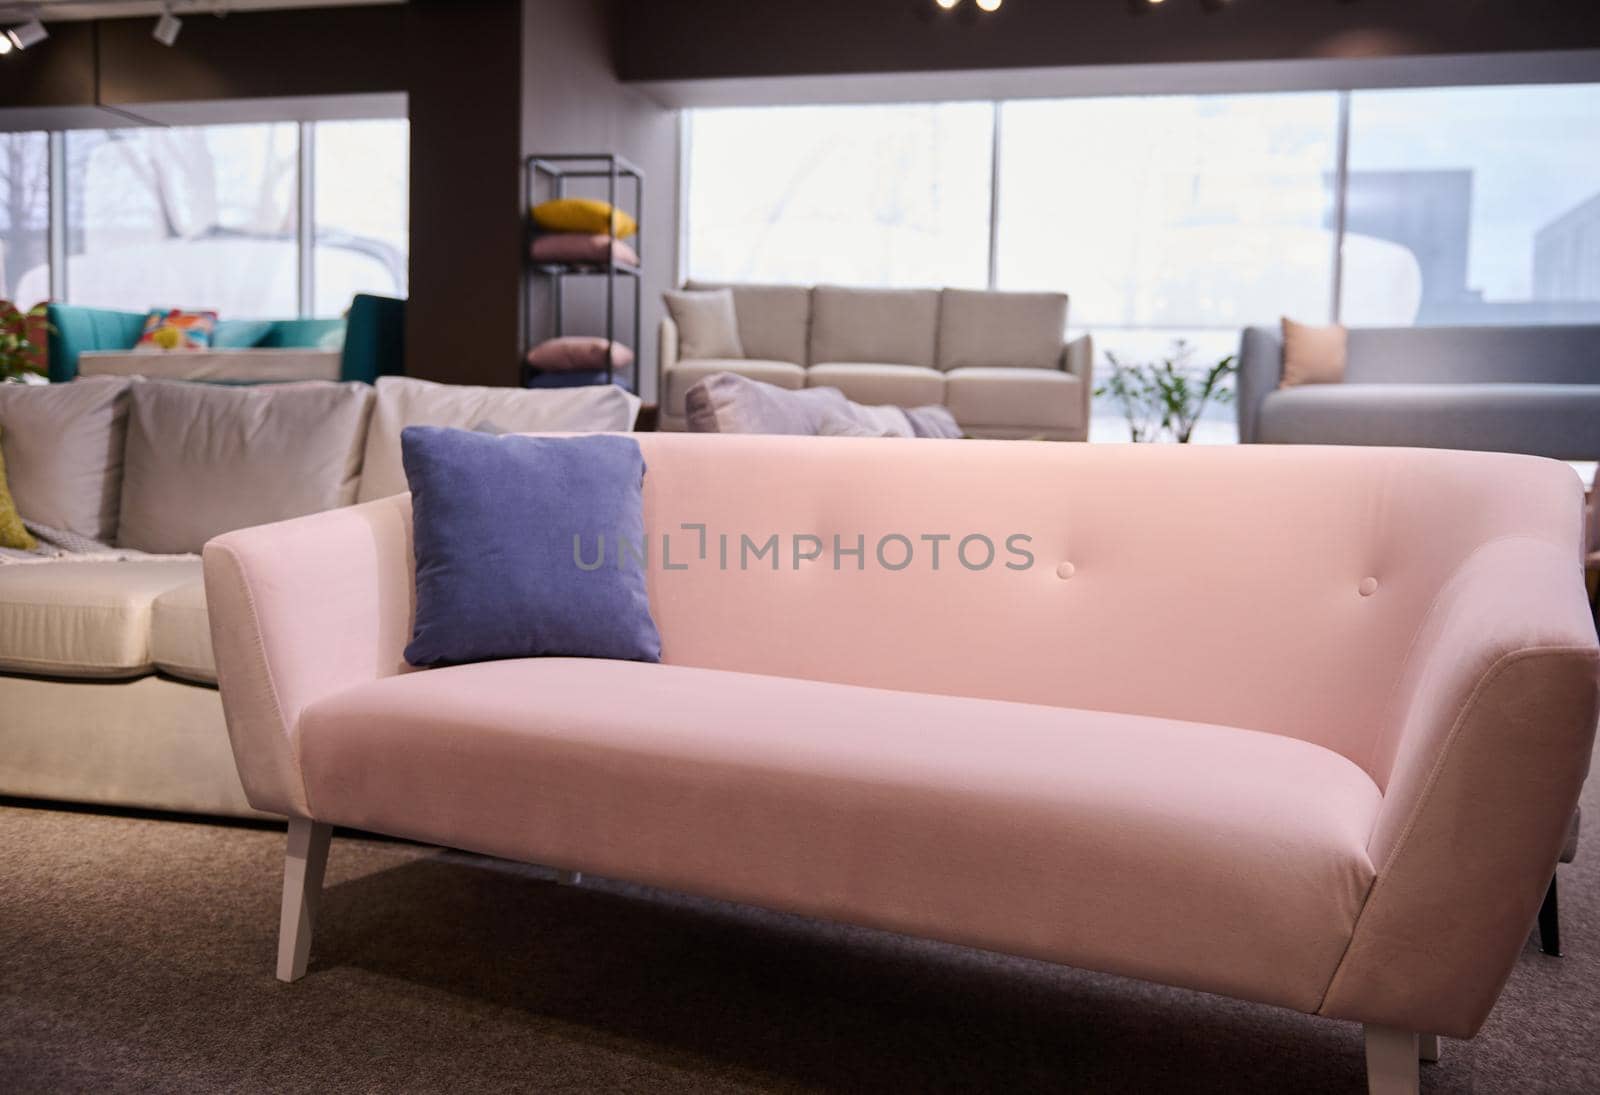 Furniture store with sofas and couches on display for sale, copy space. Furniture store showroom interior. Stylish pink sofa with purple cushion in the showroom of upholstered furniture.